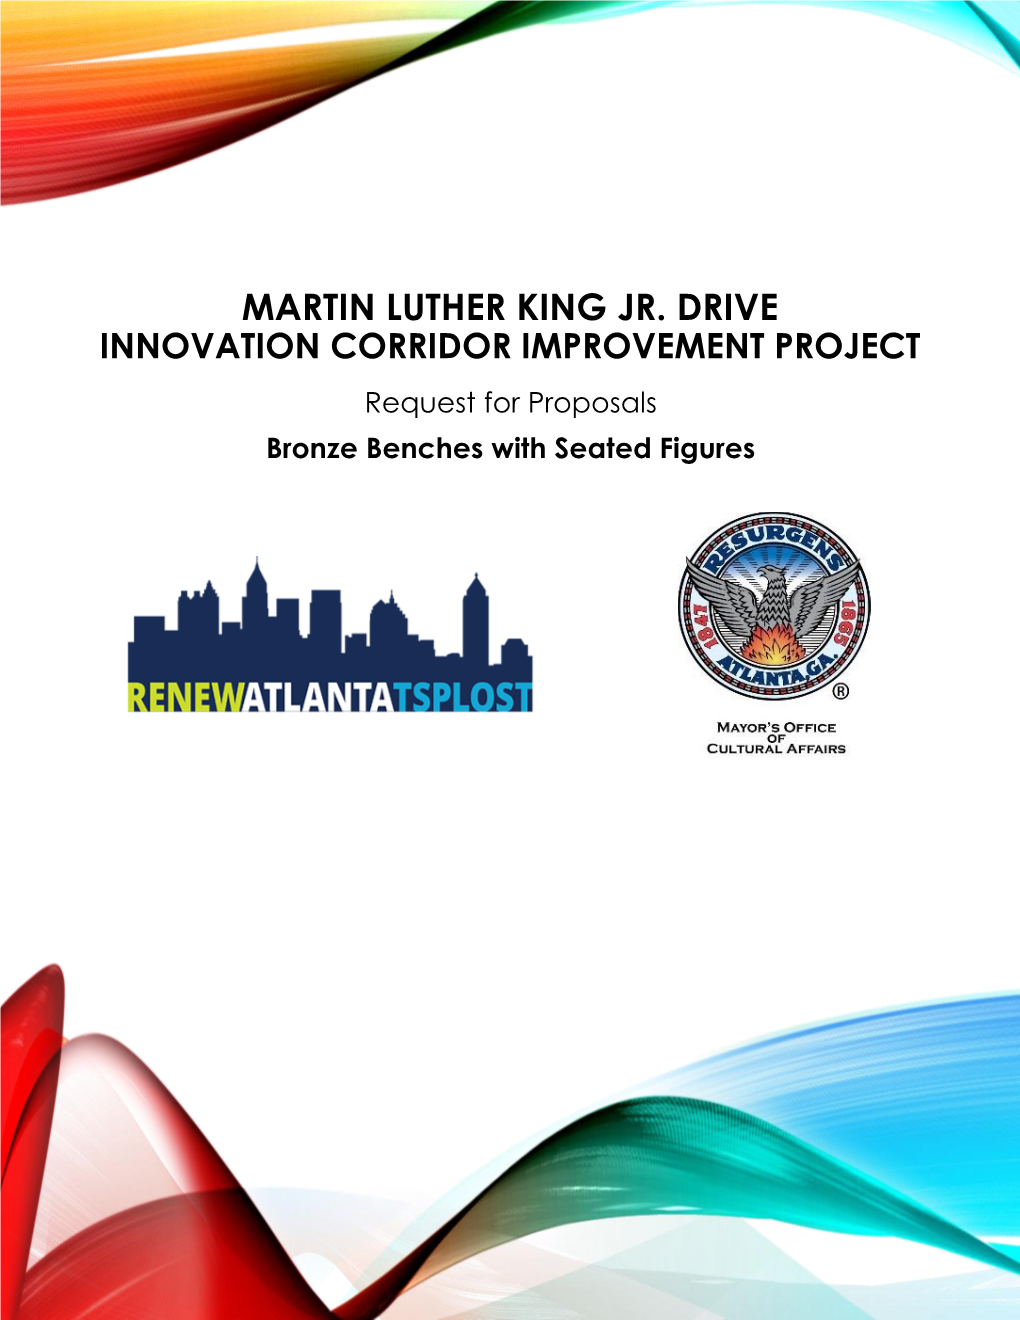 MARTIN LUTHER KING JR. DRIVE INNOVATION CORRIDOR IMPROVEMENT PROJECT Request for Proposals Bronze Benches with Seated Figures OVERVIEW